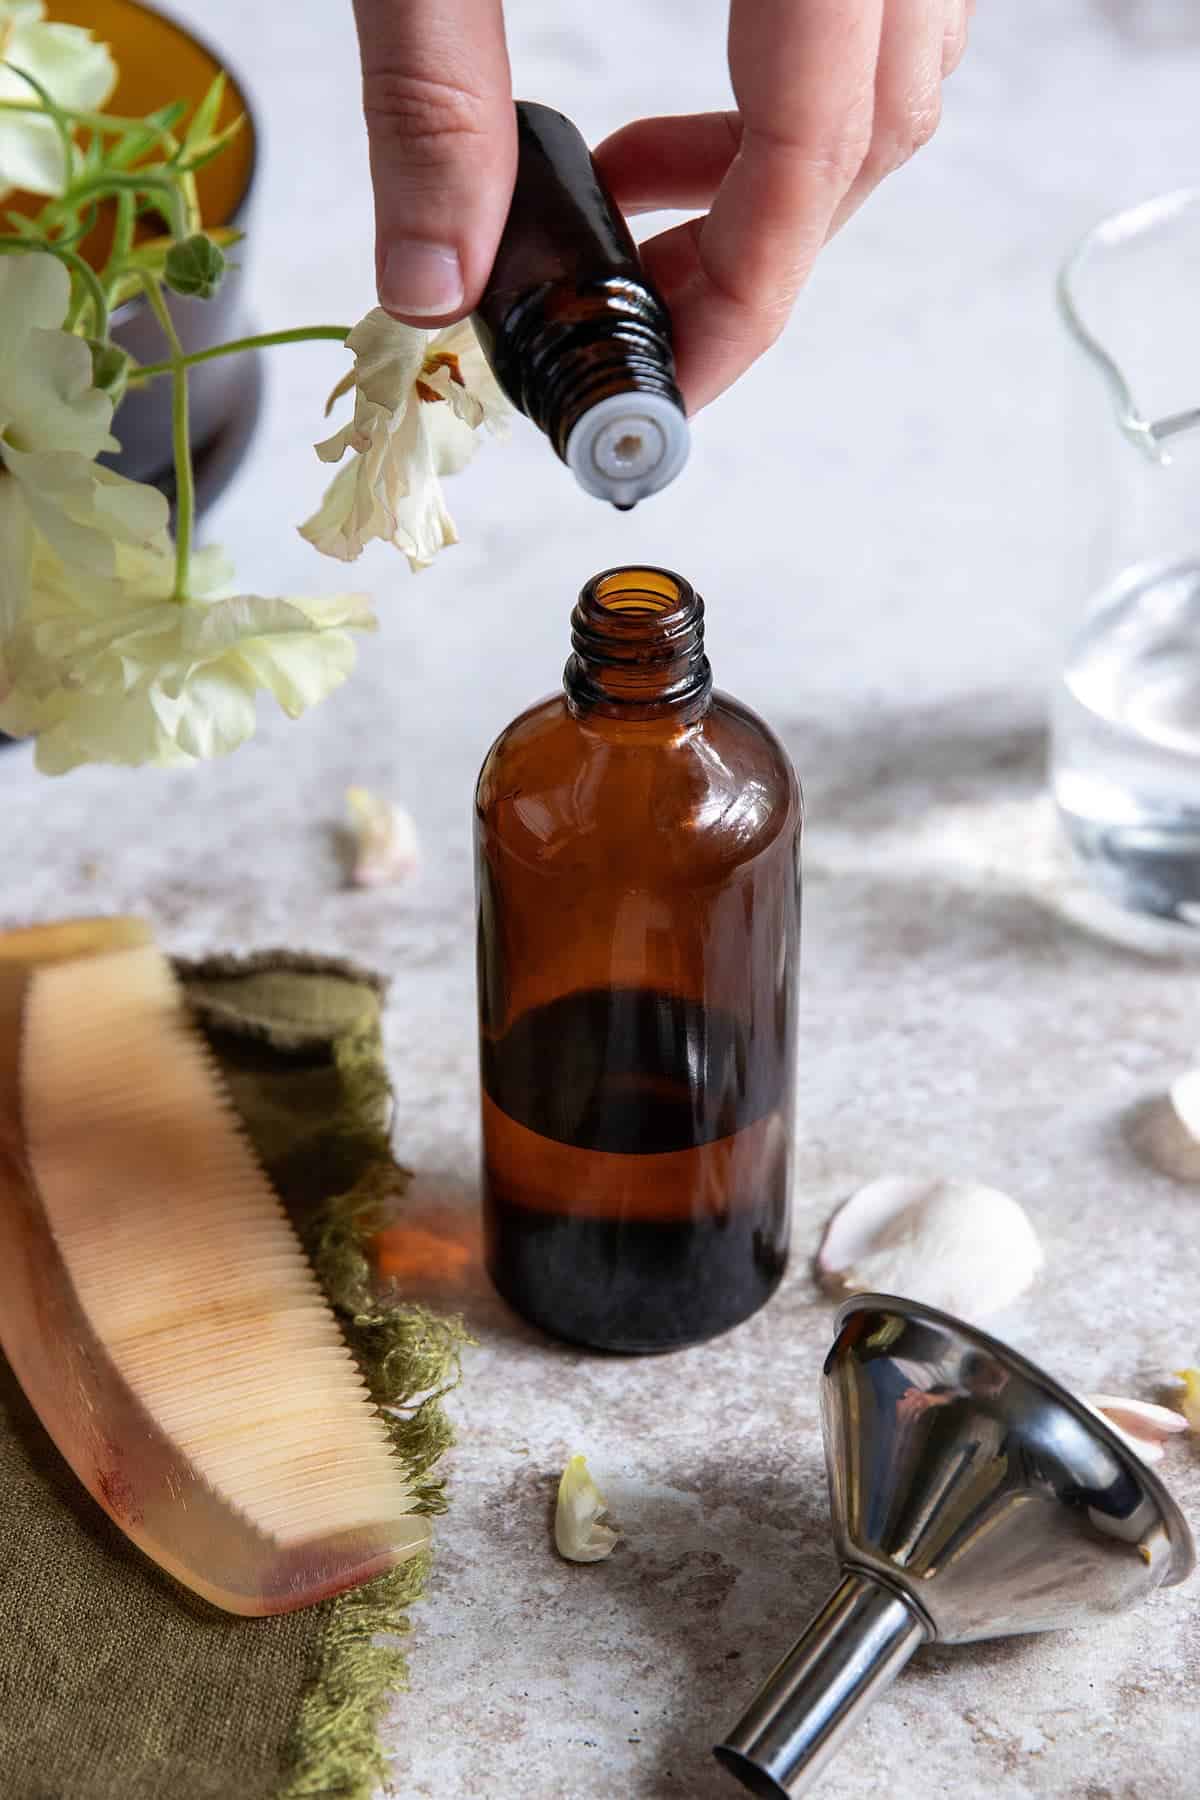 Mix Alcohol and Essential Oils for homemade hair perfume